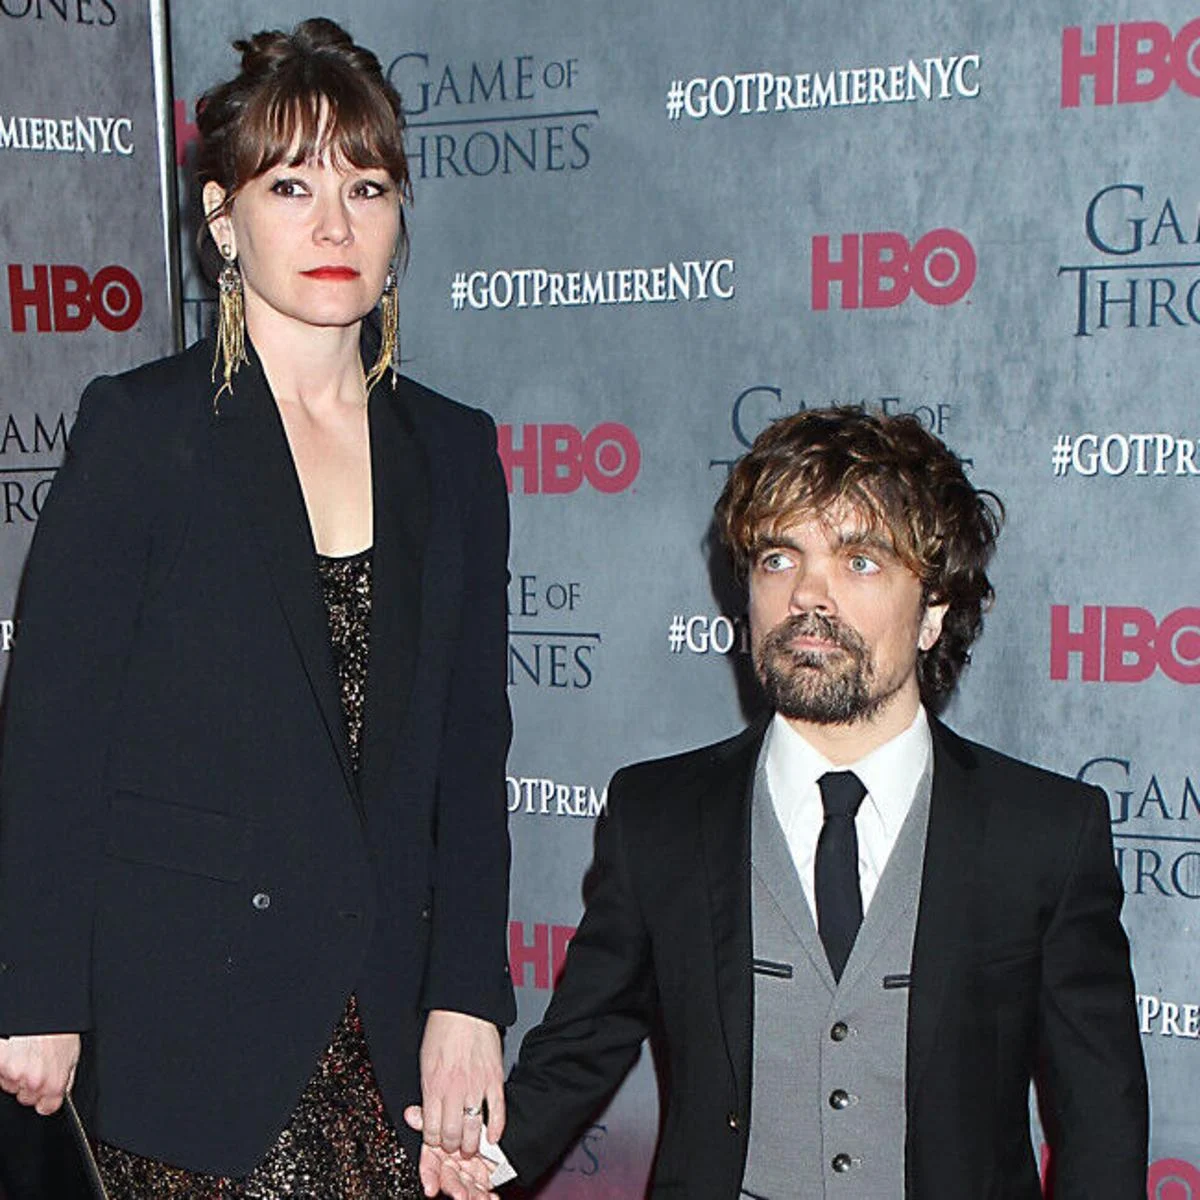 Who Is Erica Schmidt? All You Need To Know About Peter Dinklage's Wife